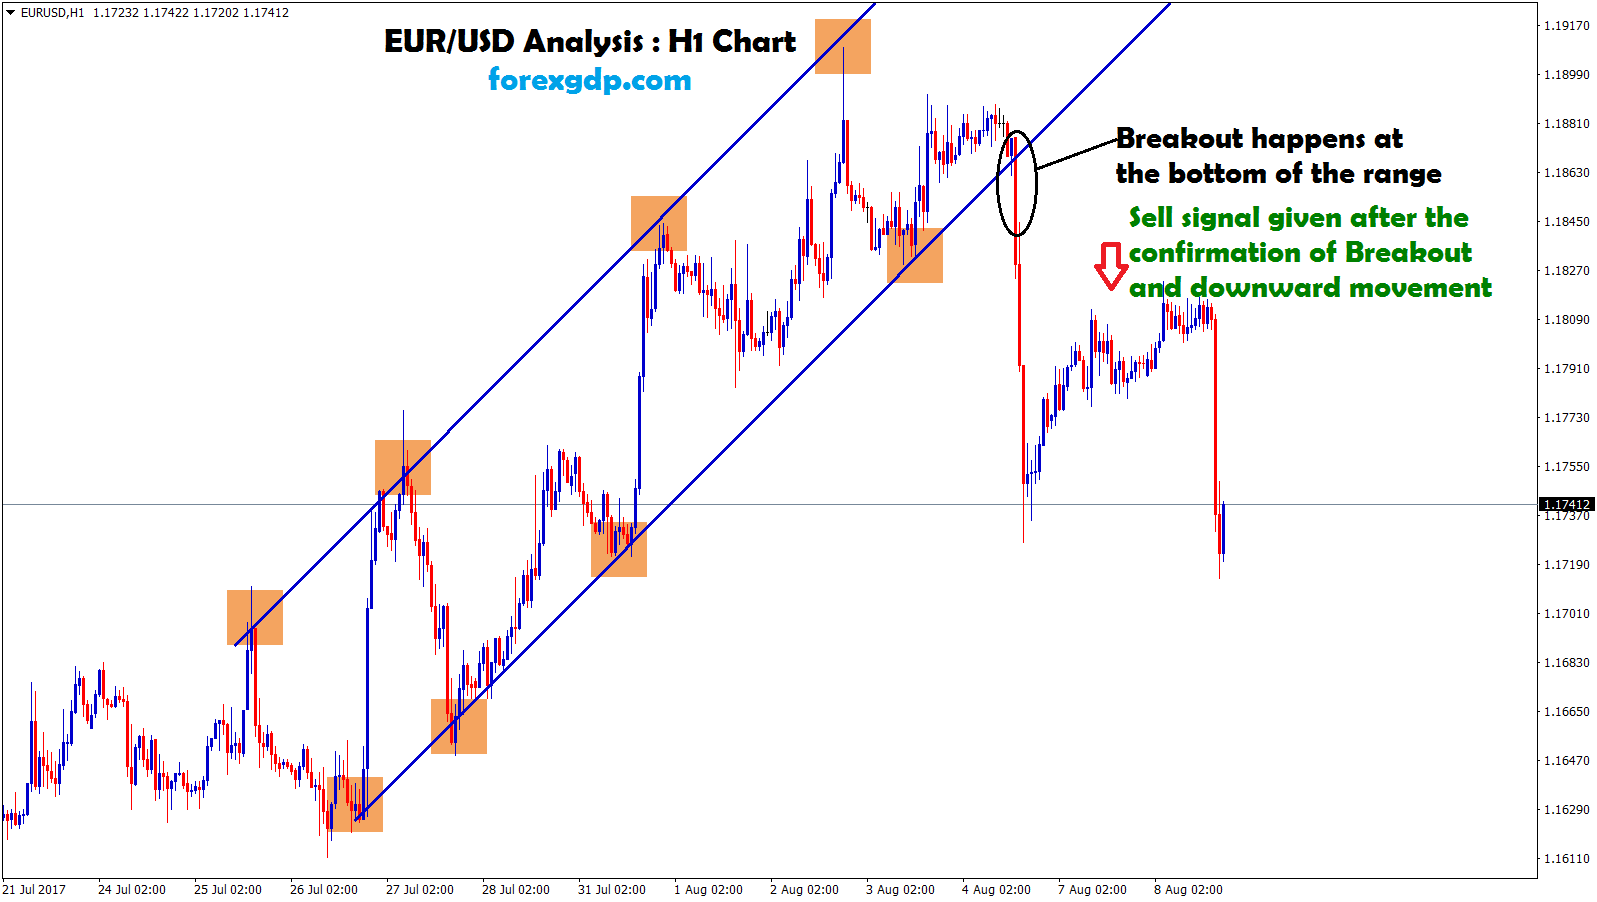 EURUSD breakout confirmation for placing sell trade